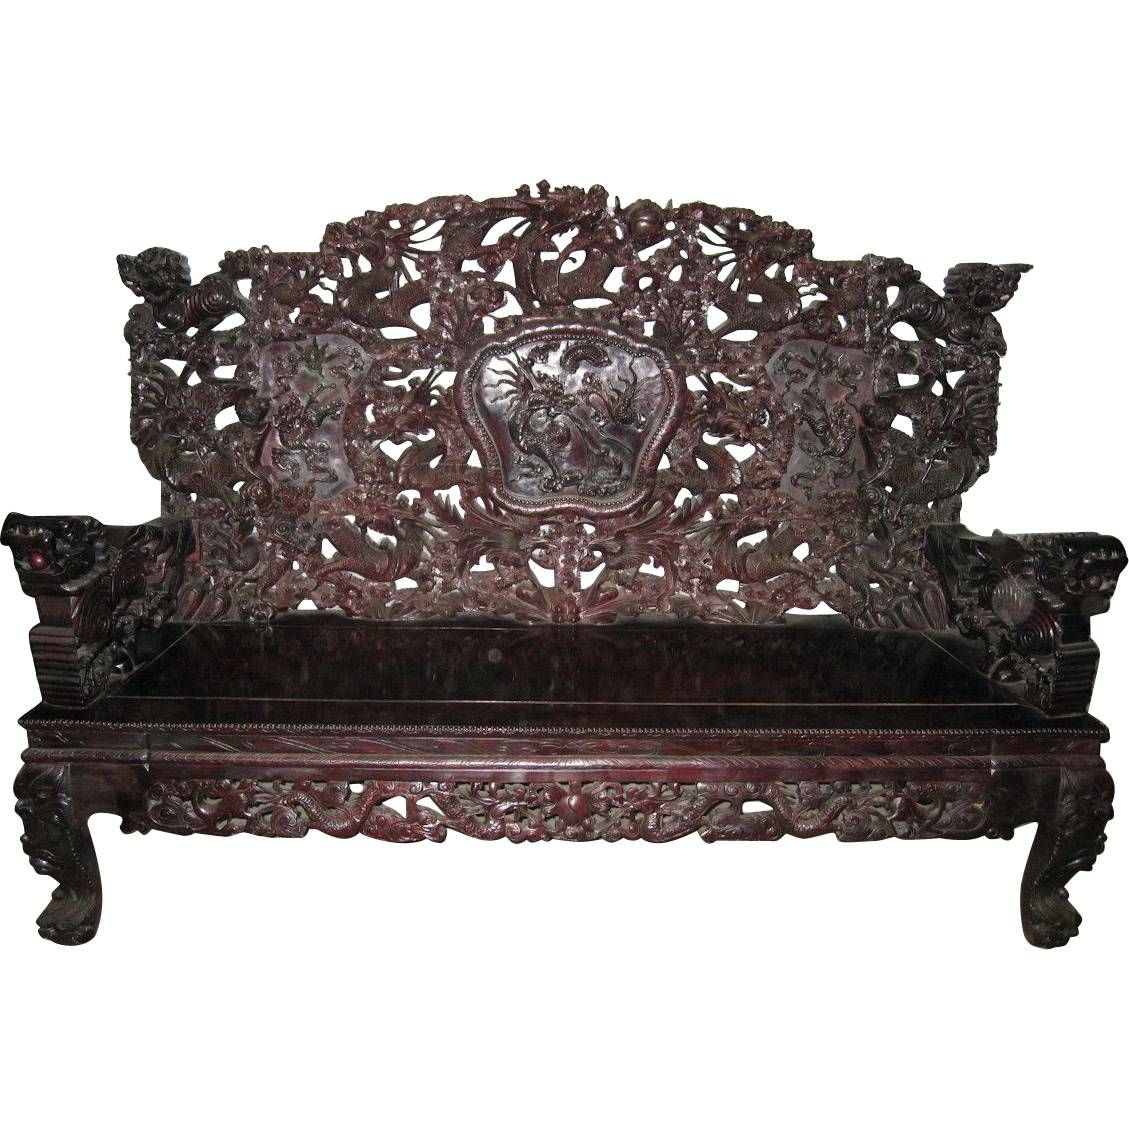 Exquisite Vintage Chinese Carved Wood Sofa From Dynastycollections With Regard To Carved Wood Sofas (View 5 of 15)